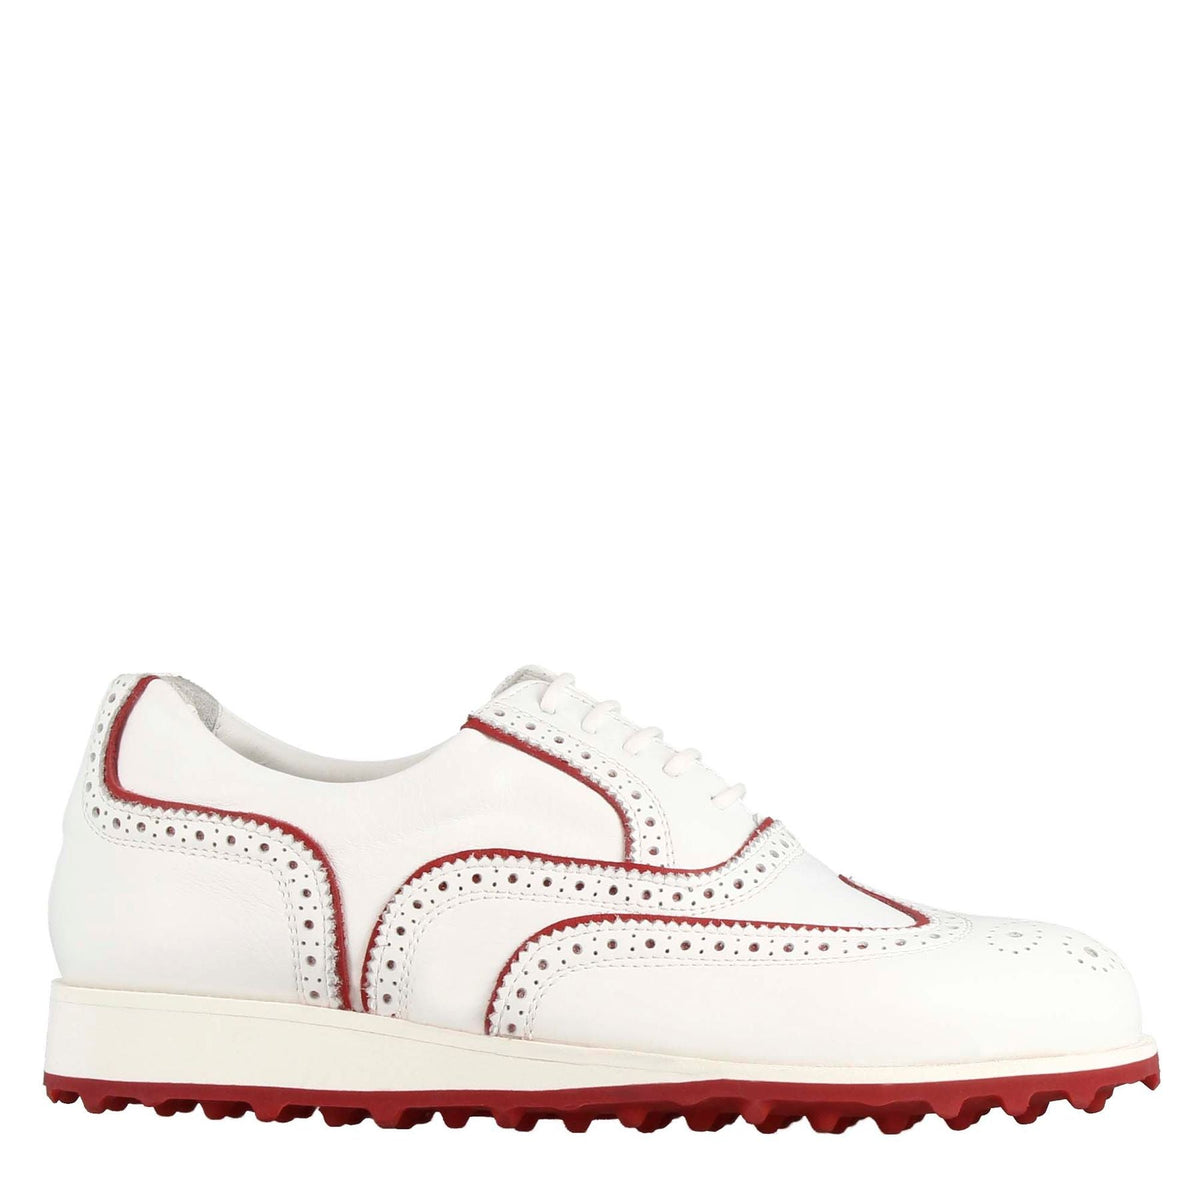 Handmade men's golf shoes in white leather with red details